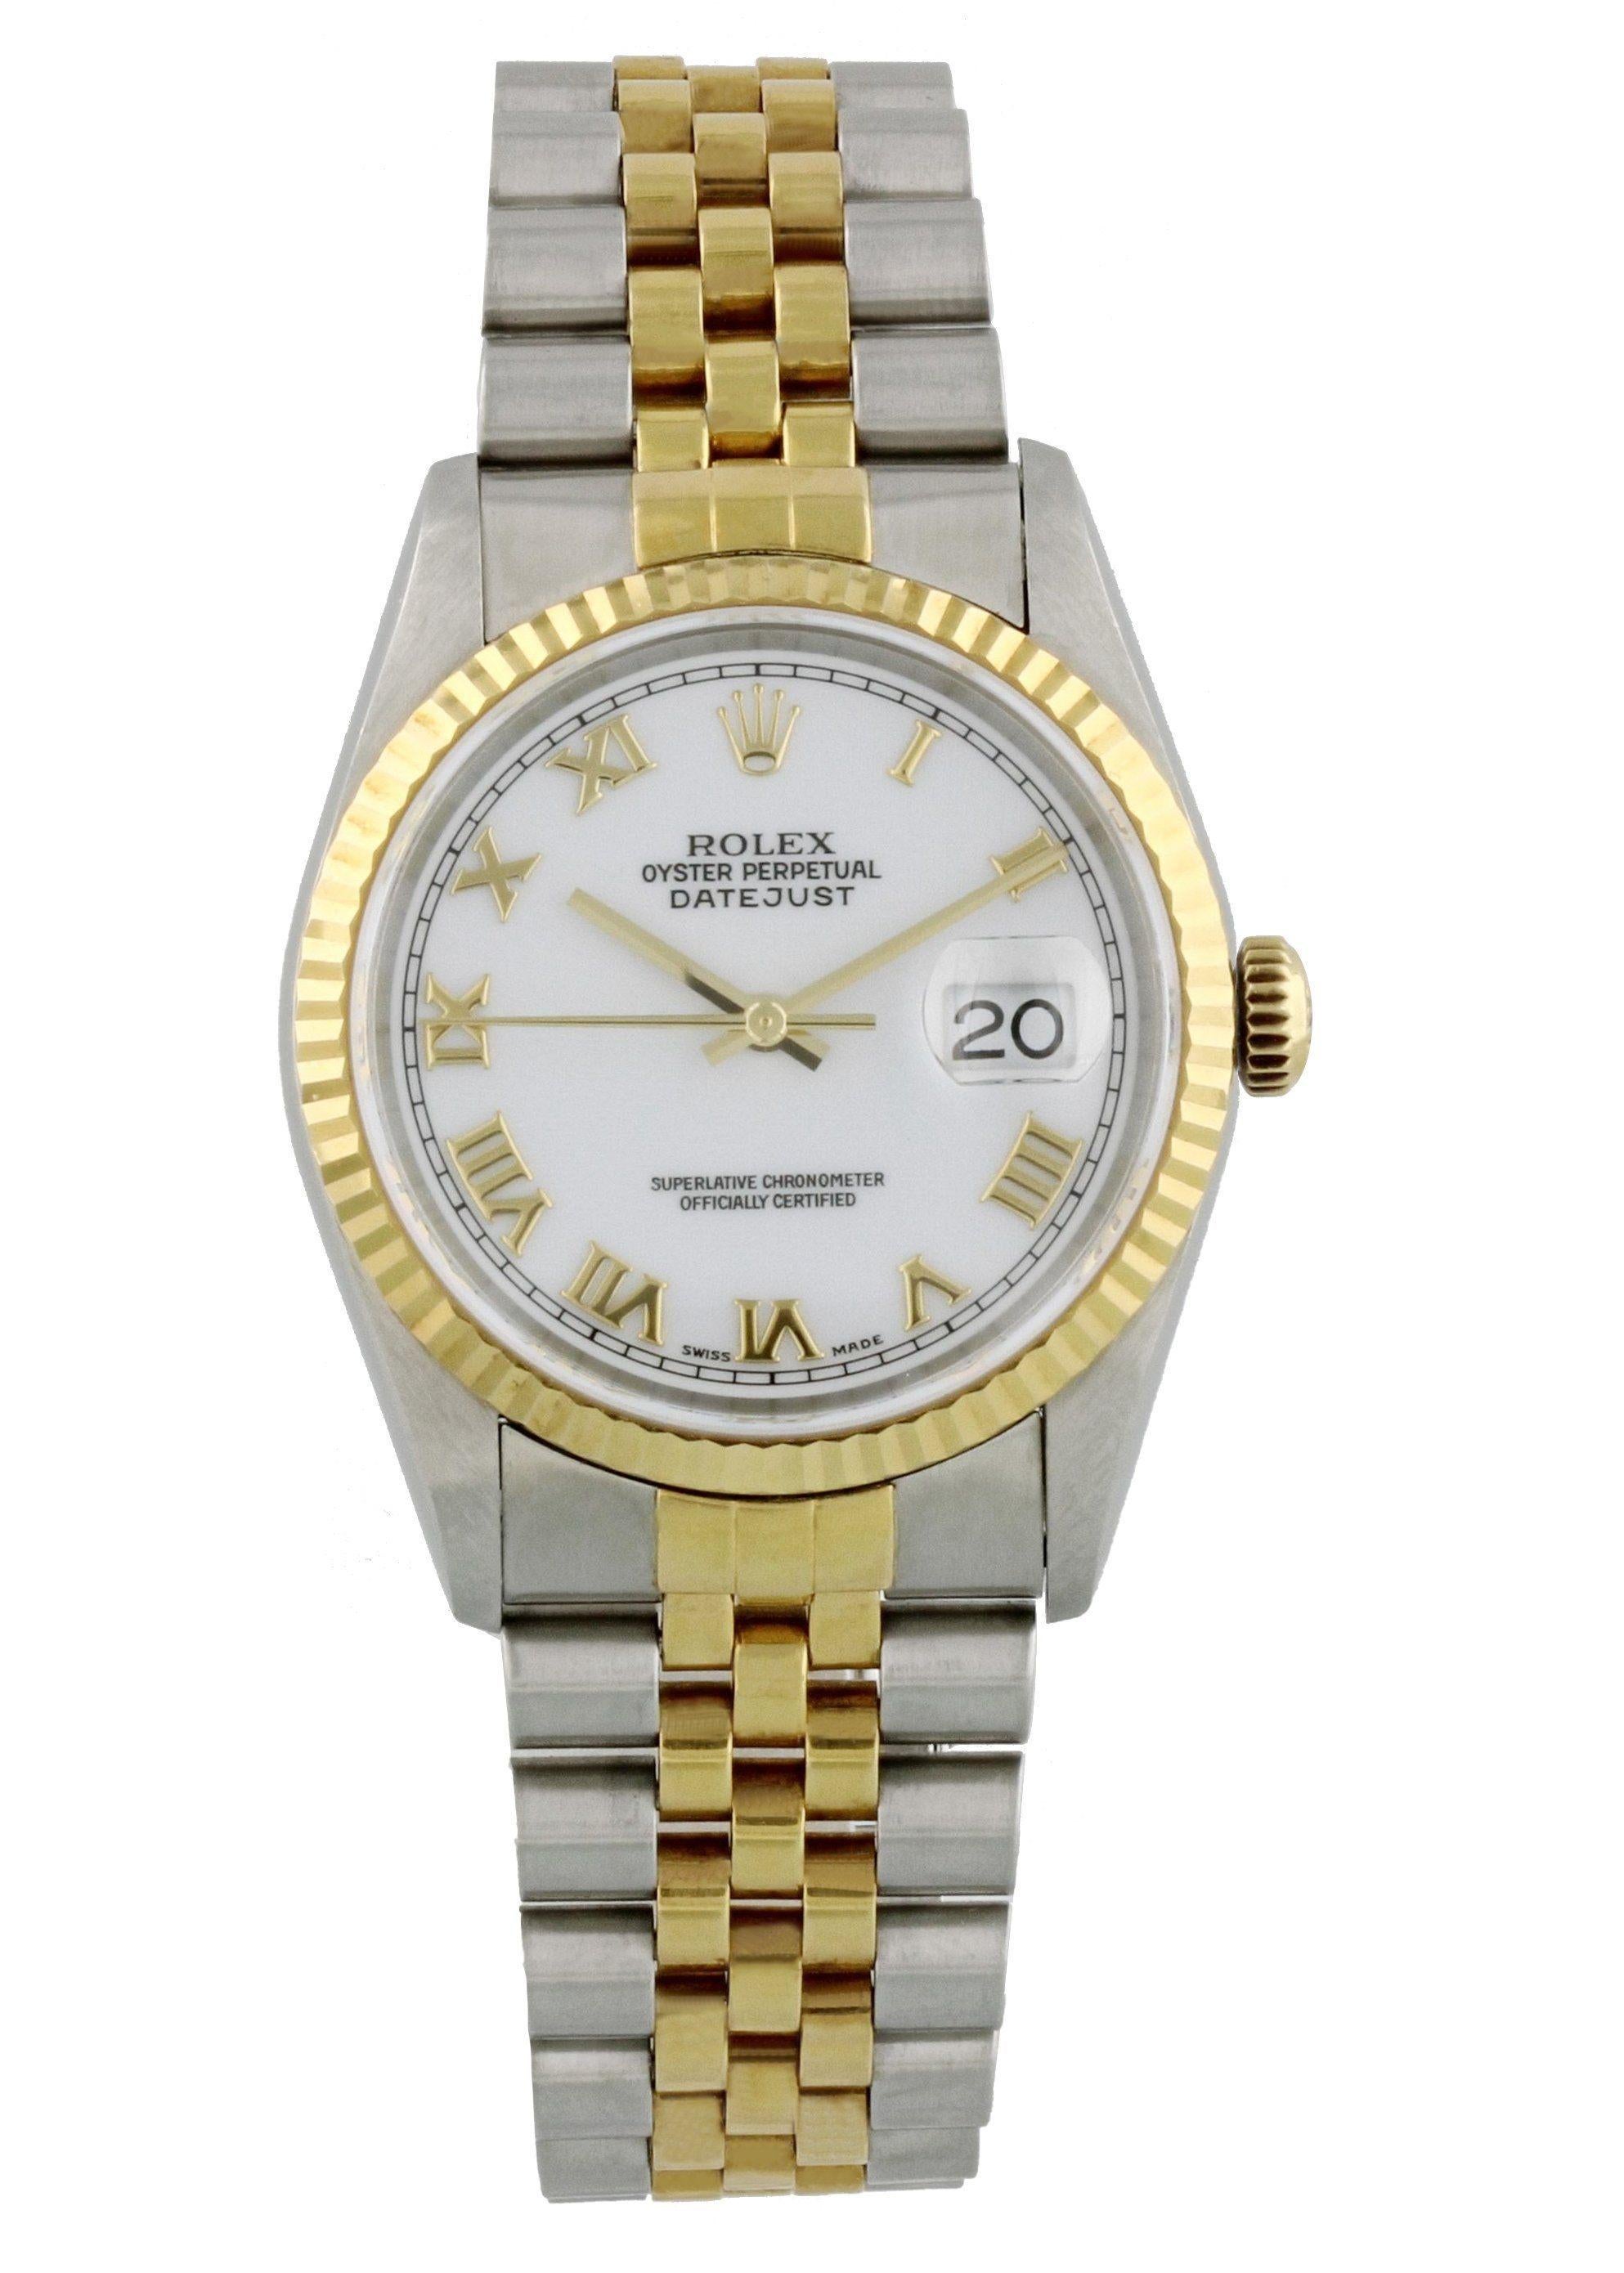 Rolex Oyster Perpetual Datejust 16233 Men's Watch. 36mm stainless steel case with an 18K yellow gold fluted bezel. White dial with gold hands and hour markers. Quickset date function at the 3 o'clock position. 18K yellow gold and stainless steel